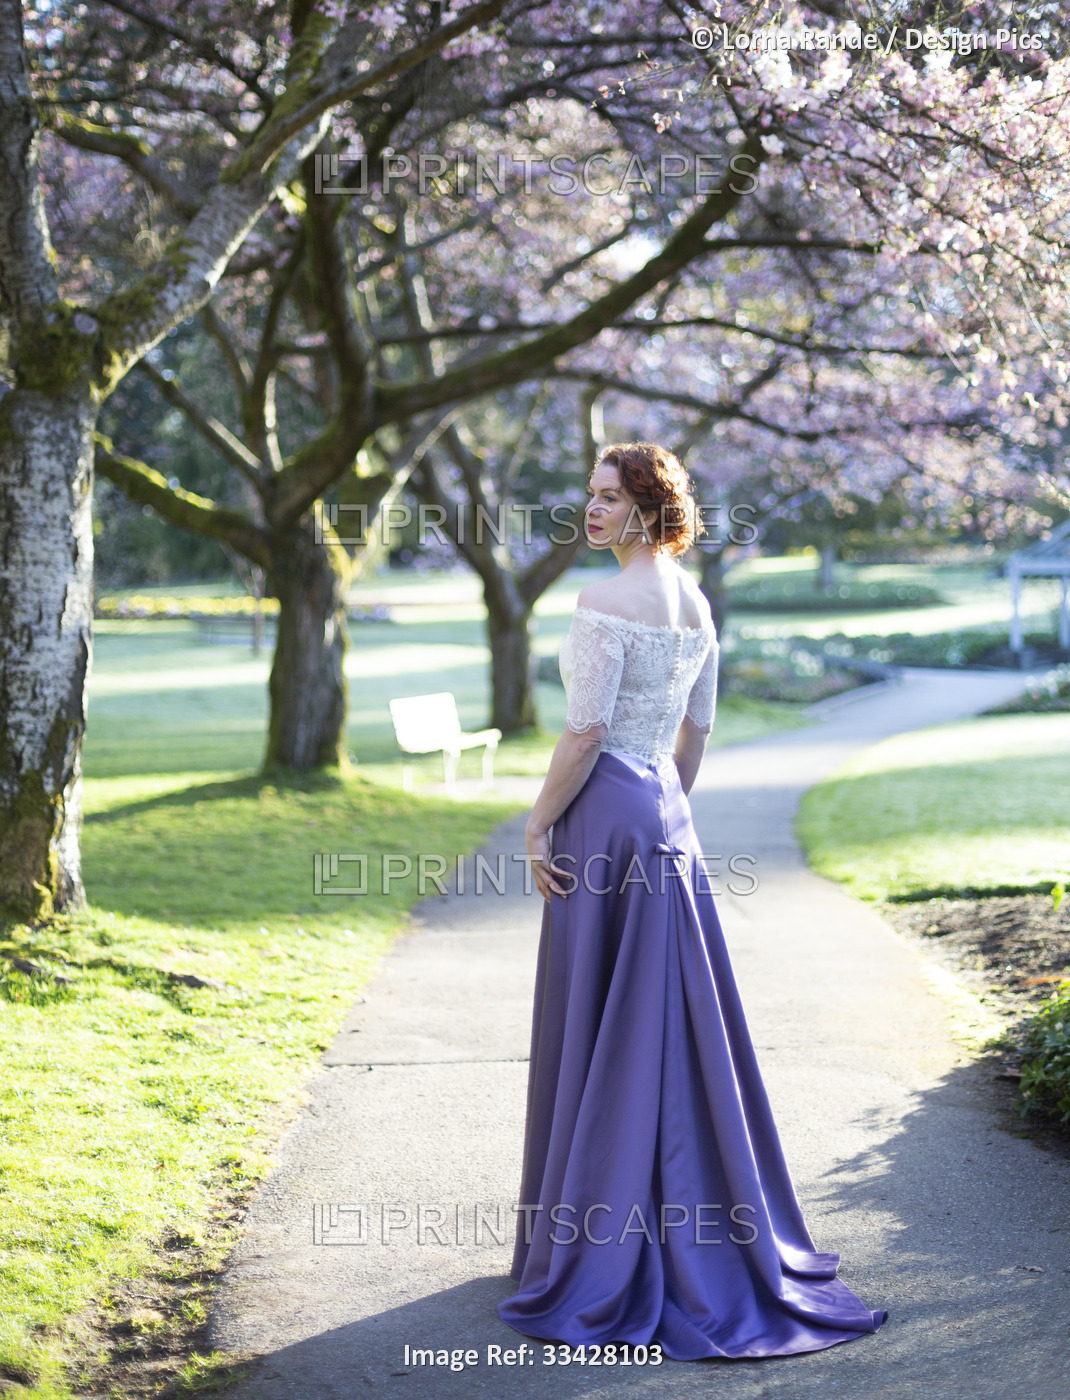 A woman with red curly hair and formal gown standing on a footpath in the ...